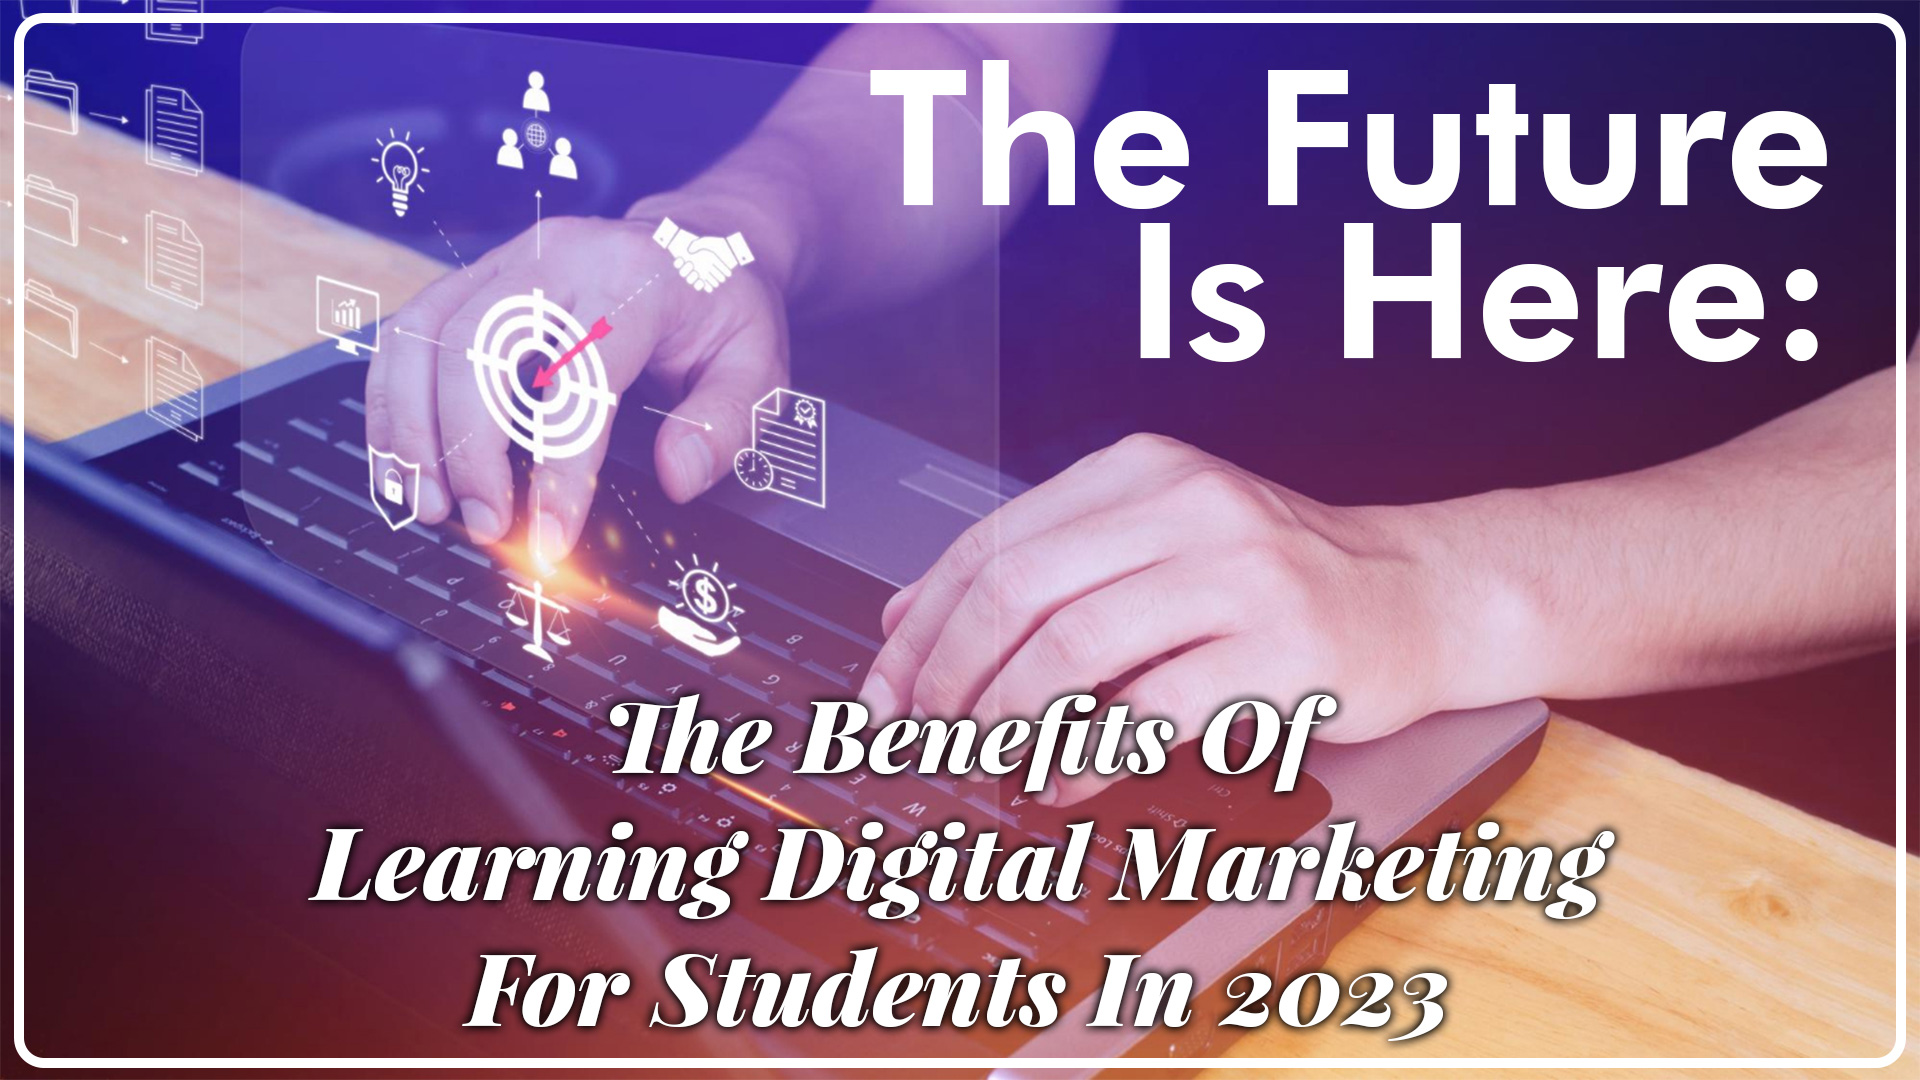 The-Future-Is-Here---The-Benefitts-Of-Learning-Digital-Marketing-For-Students-In-2023